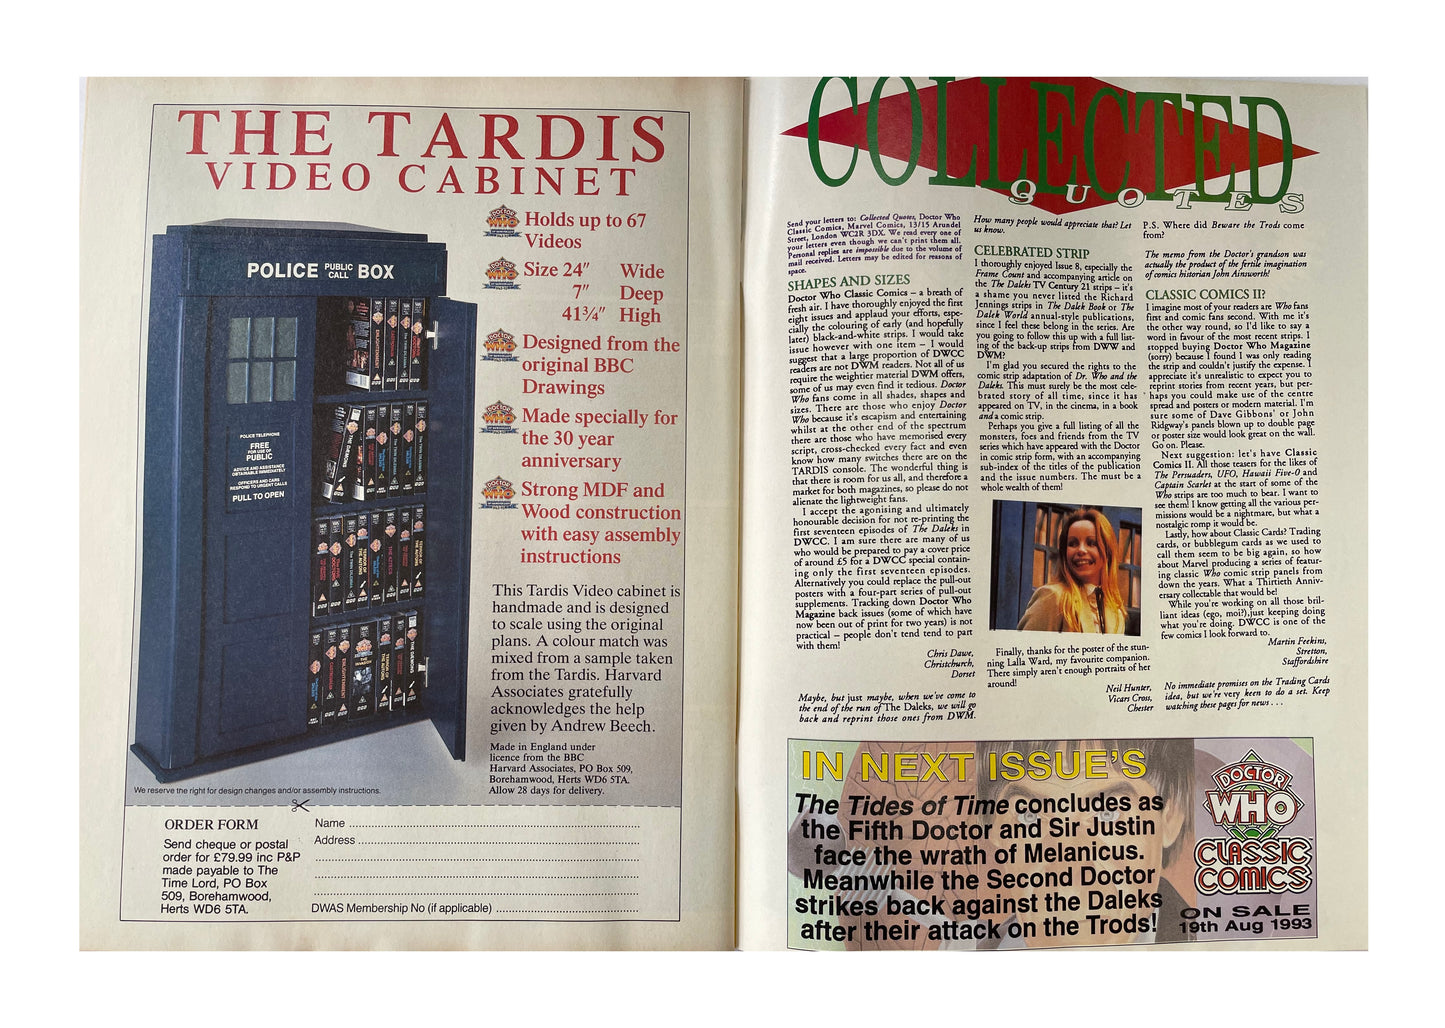 Vintage 1993 Marvels Doctor Dr Who Classic Comics Full Colour Issue 10 Comic 18th August 1993 - Brand New Shop Stock Room Find